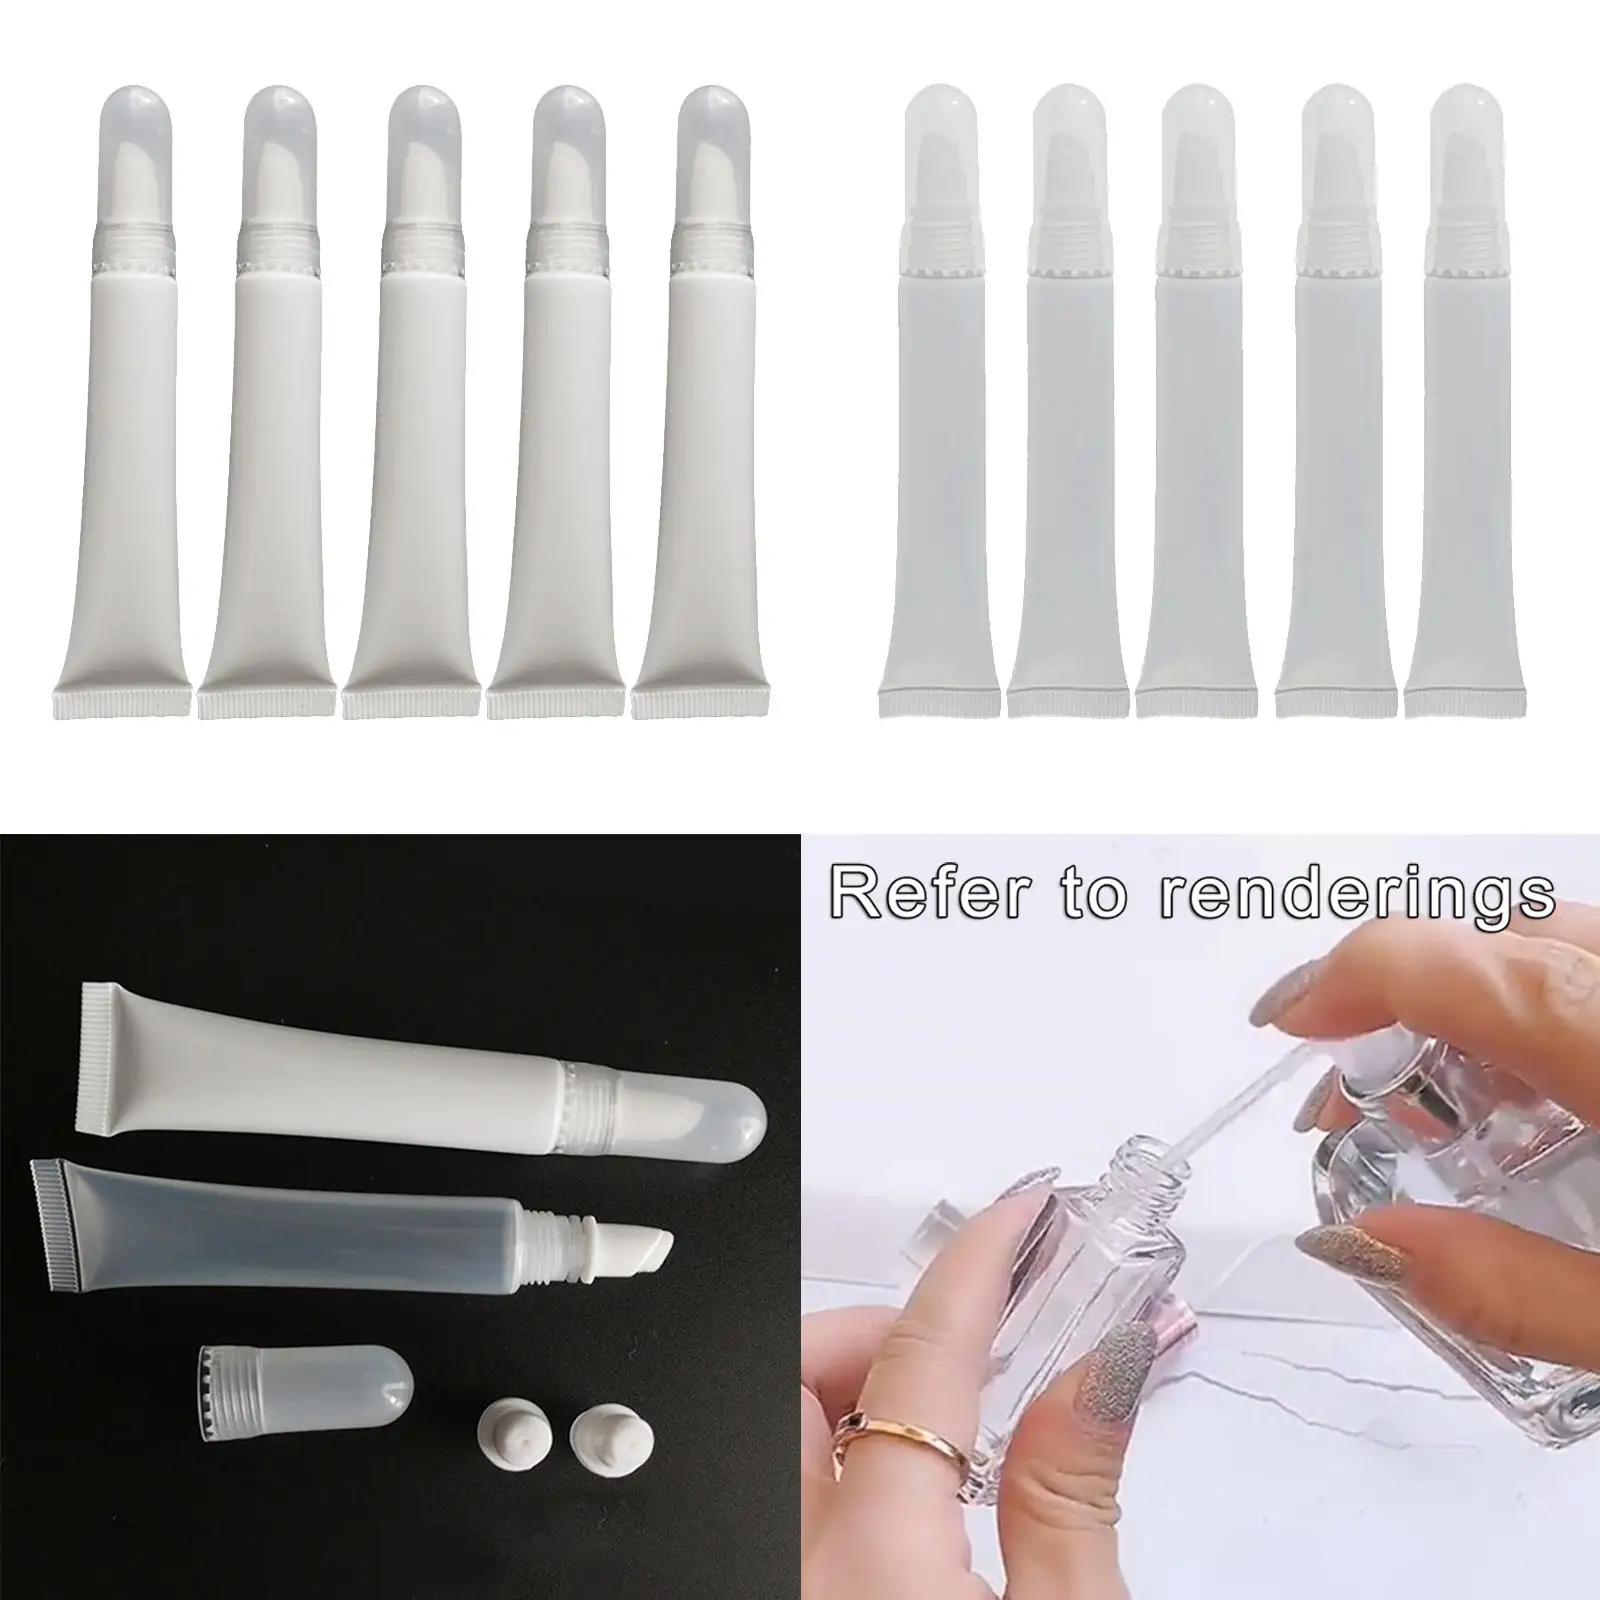 5-Pack Soft 10ml Plastic Empty Tubes Refillable Toiletry Lotion Containers for Traveling Reusable Home Use DIY Project Washable